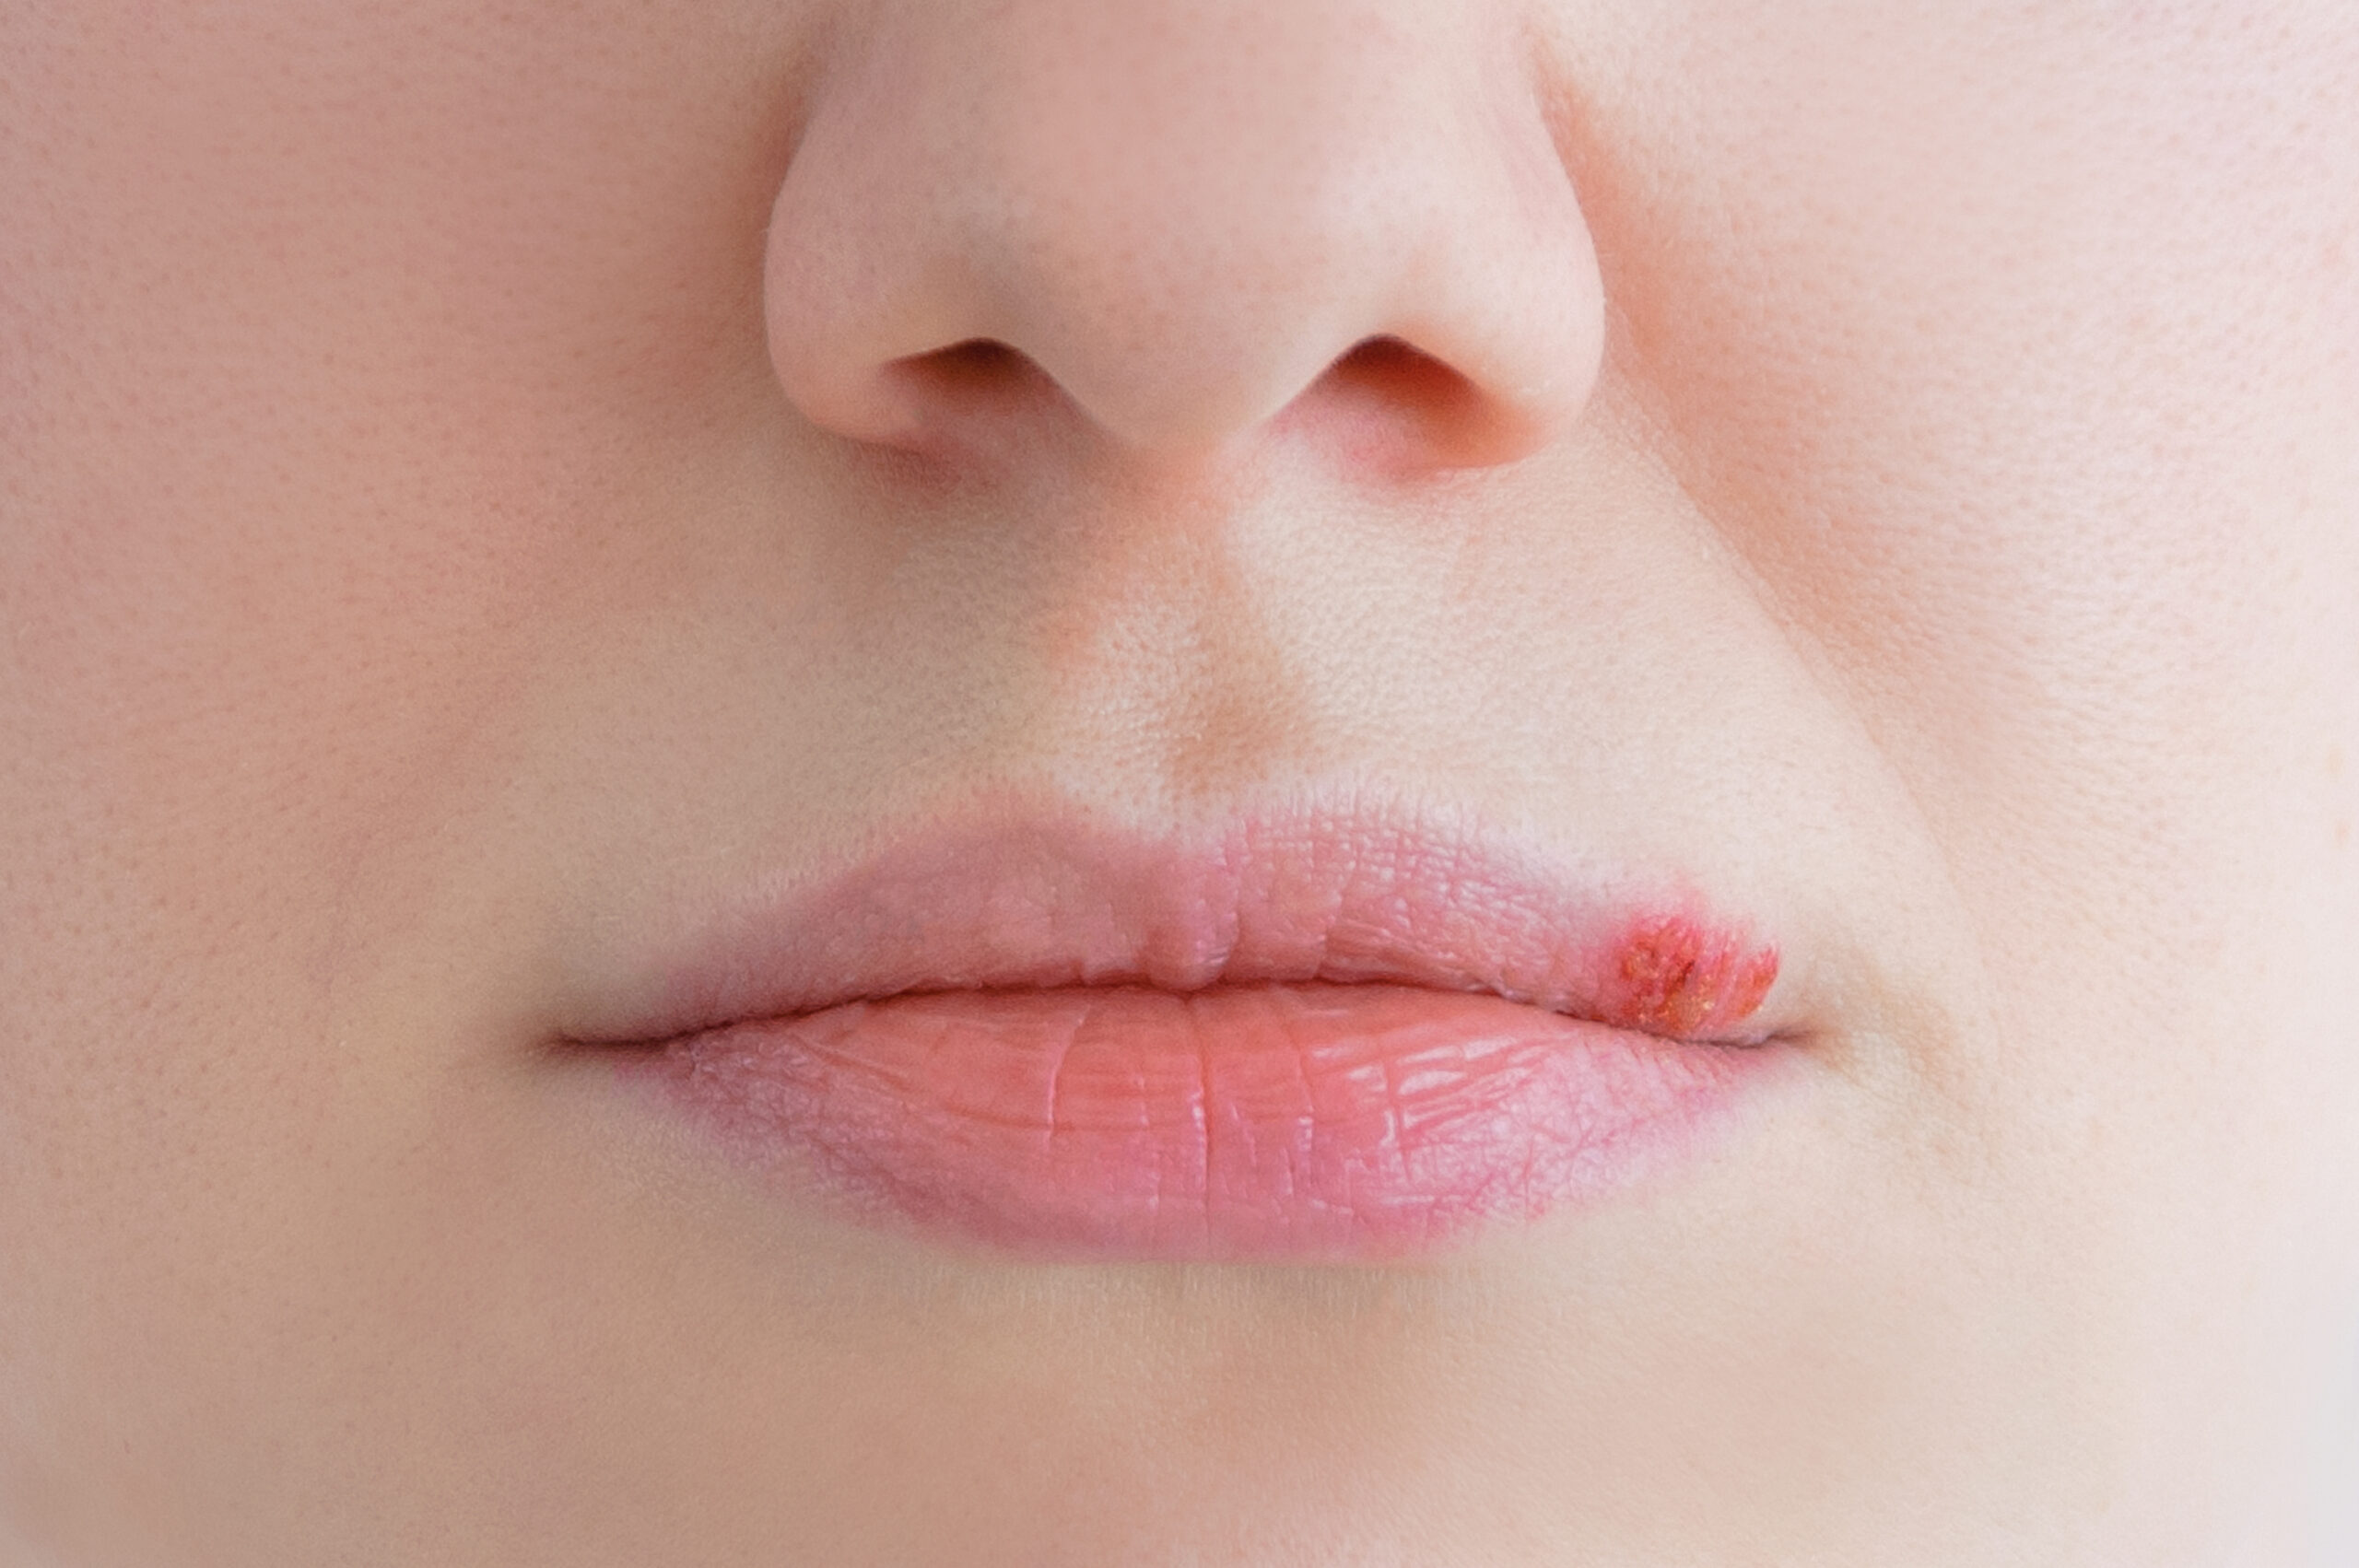 Herpes: What Is, Types, Symptoms, and Treatment